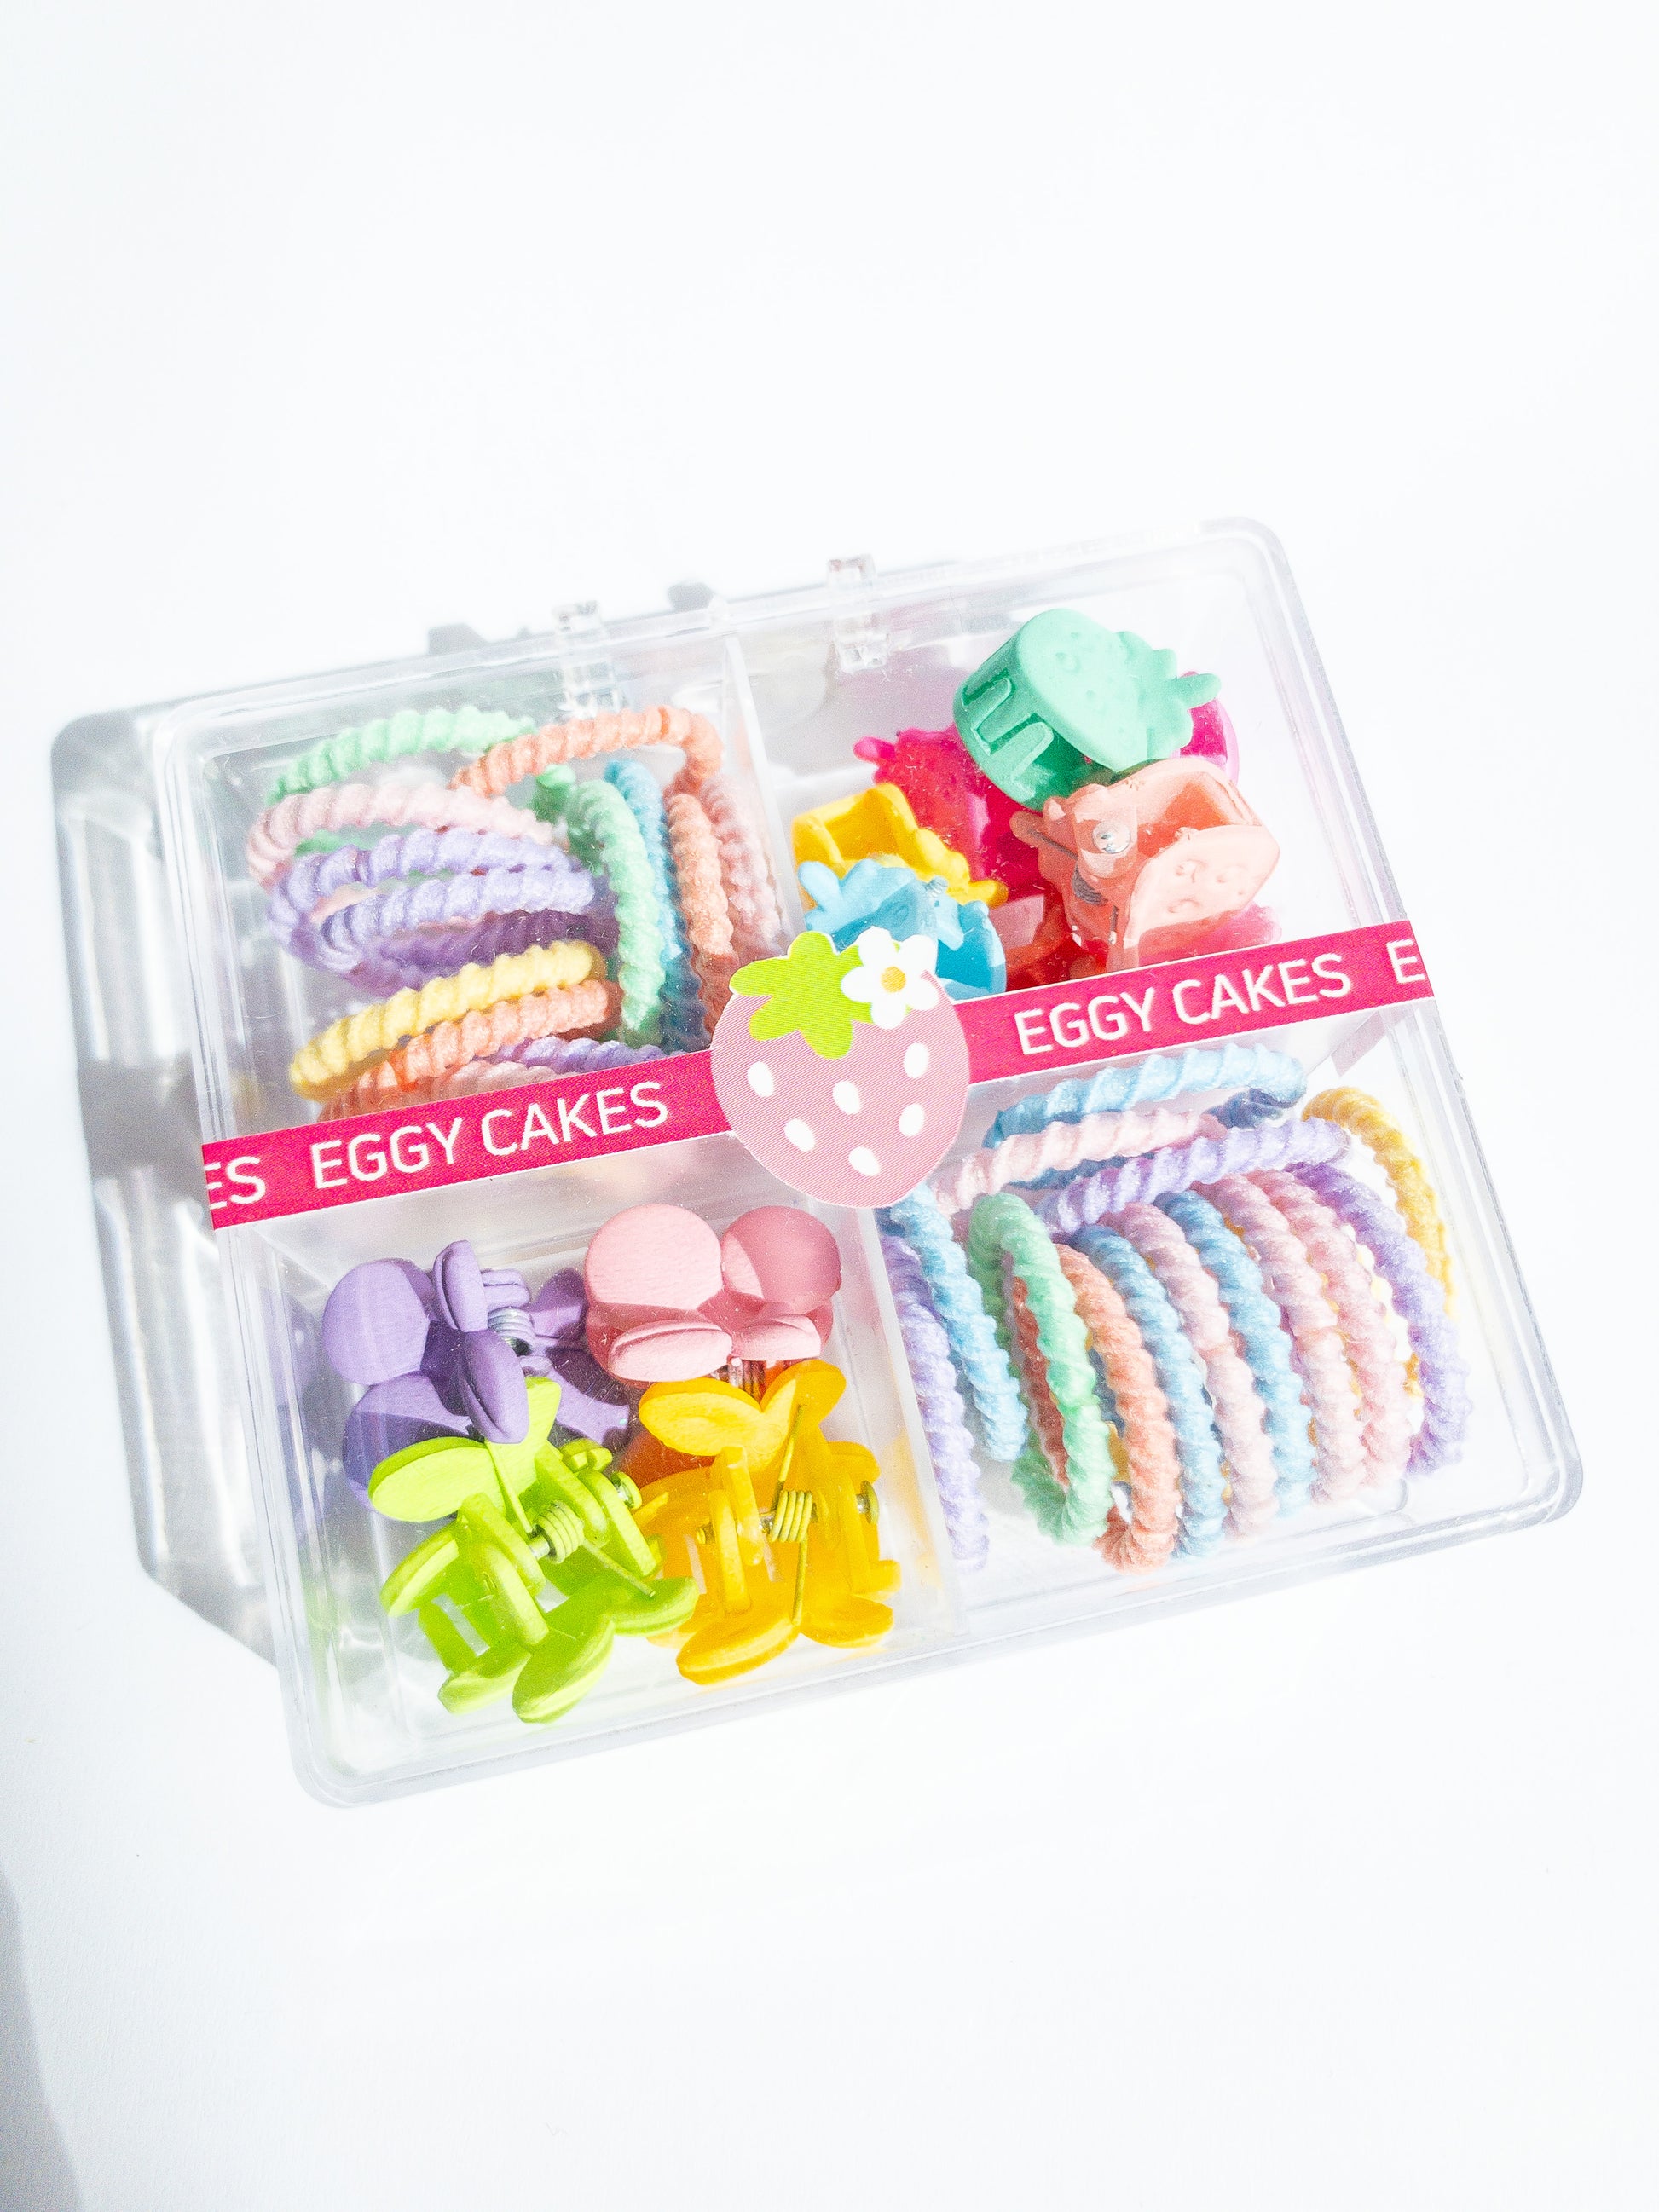 This mini hair claw set is the one you need! A boxed set with a mix of mini strawberry hair claws and a mix of small cherry hair claws along with small hair ties. The hair ties are super soft, no tug and thin, perfect for those cute pigtails or braids. Clip the hair claws throughout to make that fun style.